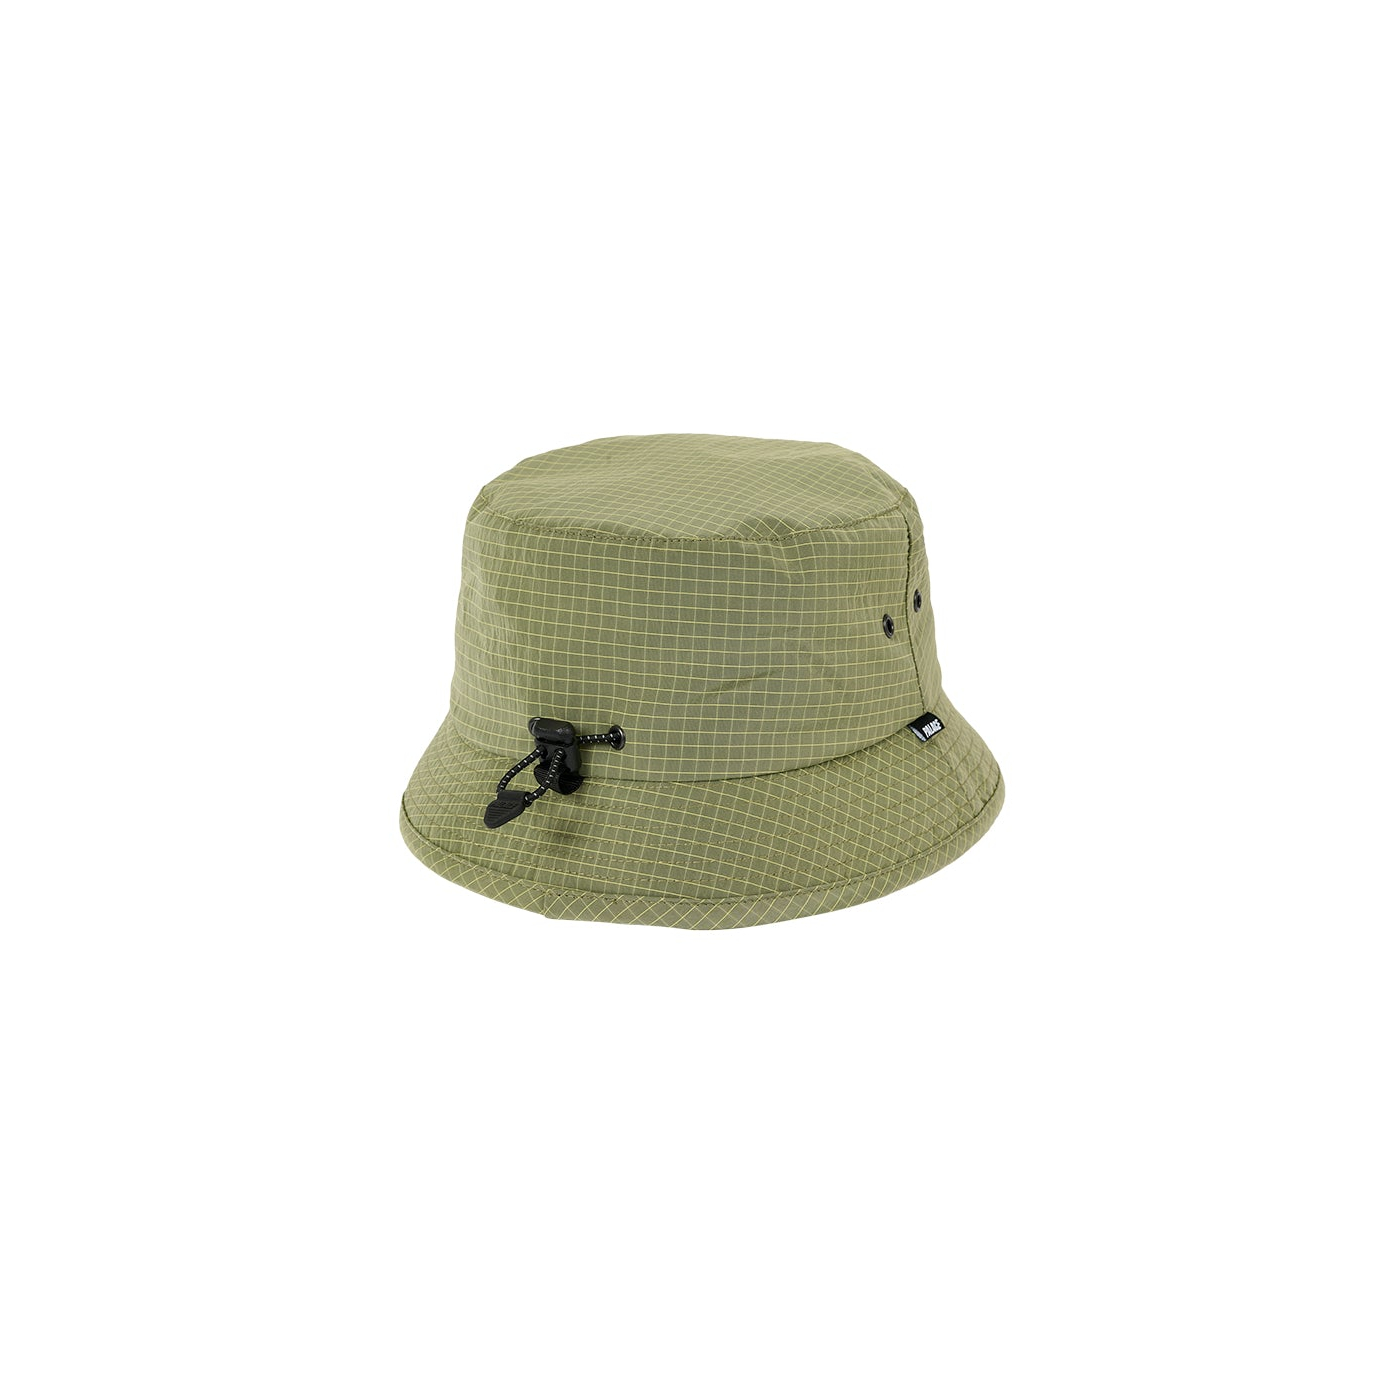 Thumbnail Y-RIPSTOP SHELL BUCKET LIME one color